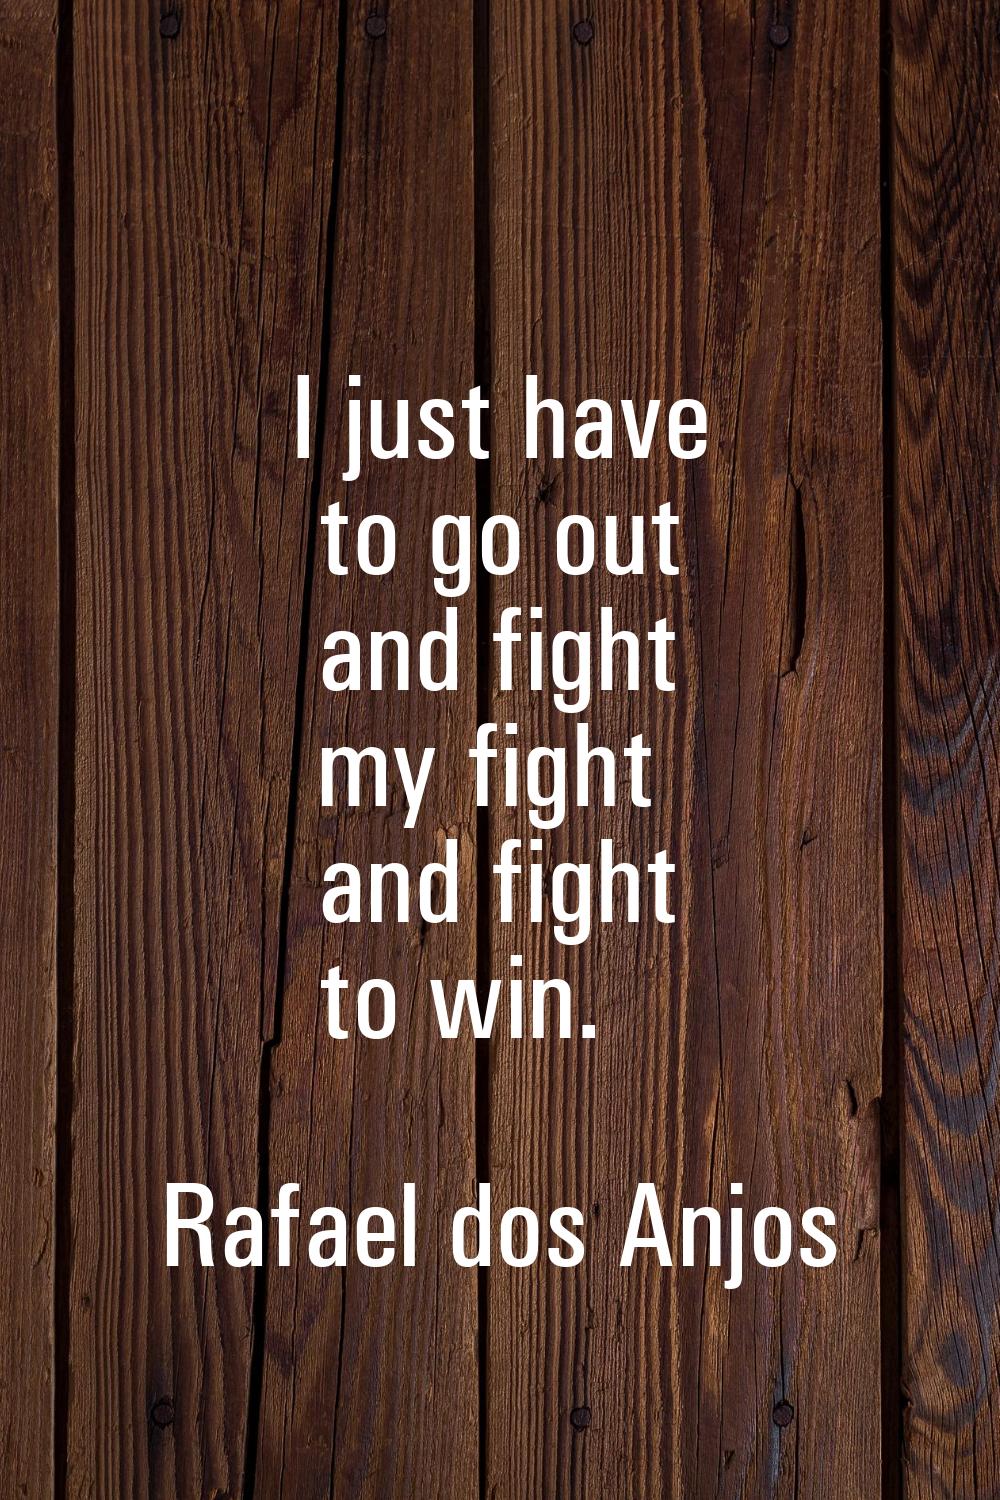 I just have to go out and fight my fight and fight to win.